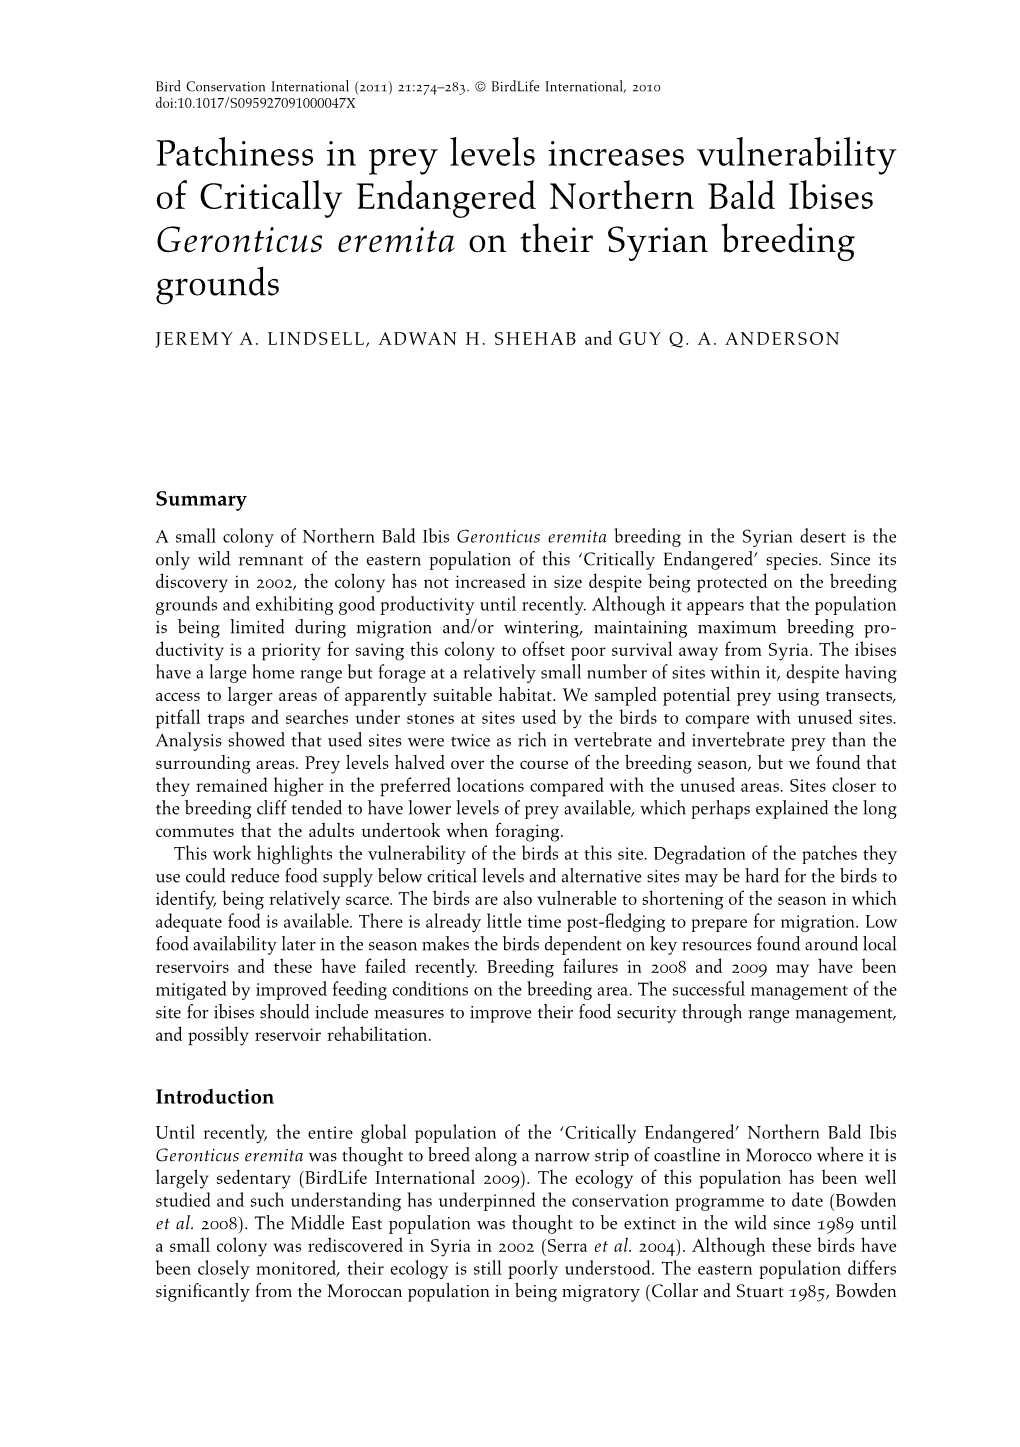 Patchiness in Prey Levels Increases Vulnerability of Critically Endangered Northern Bald Ibises Geronticus Eremita on Their Syrian Breeding Grounds